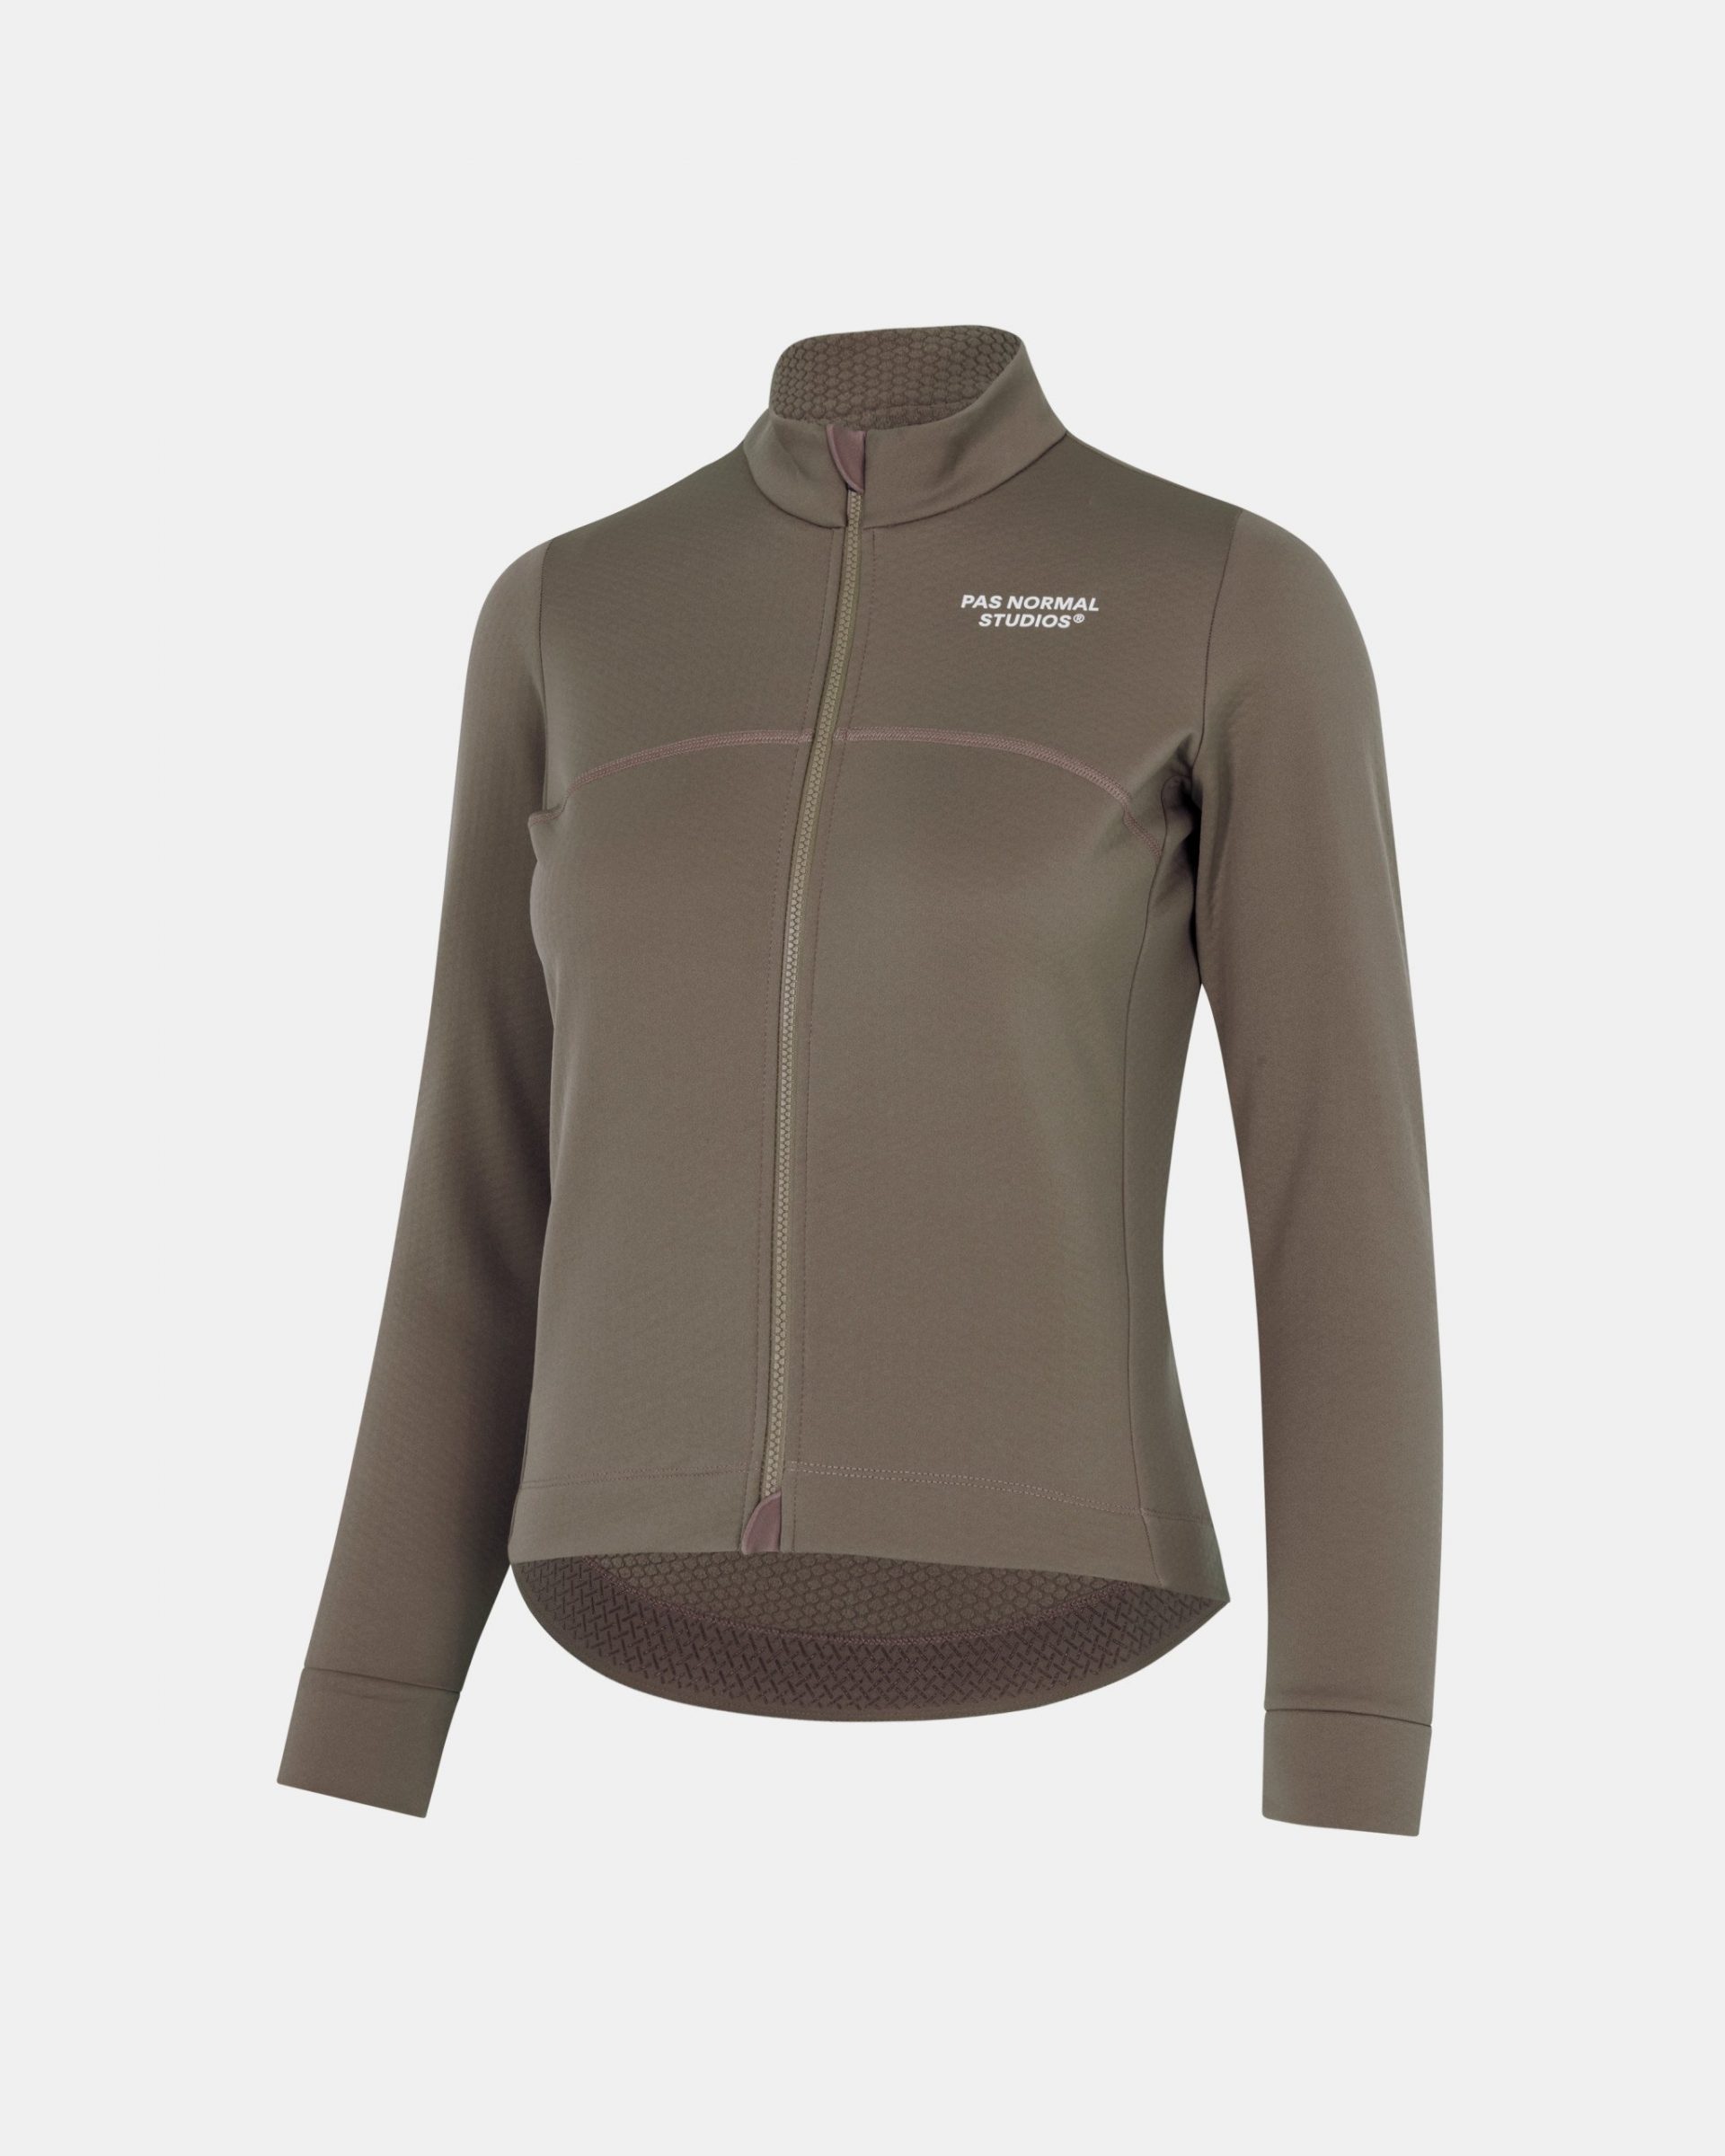 Womens-Essential-Thermal-LongSleeveJersey_Side-pdp-page